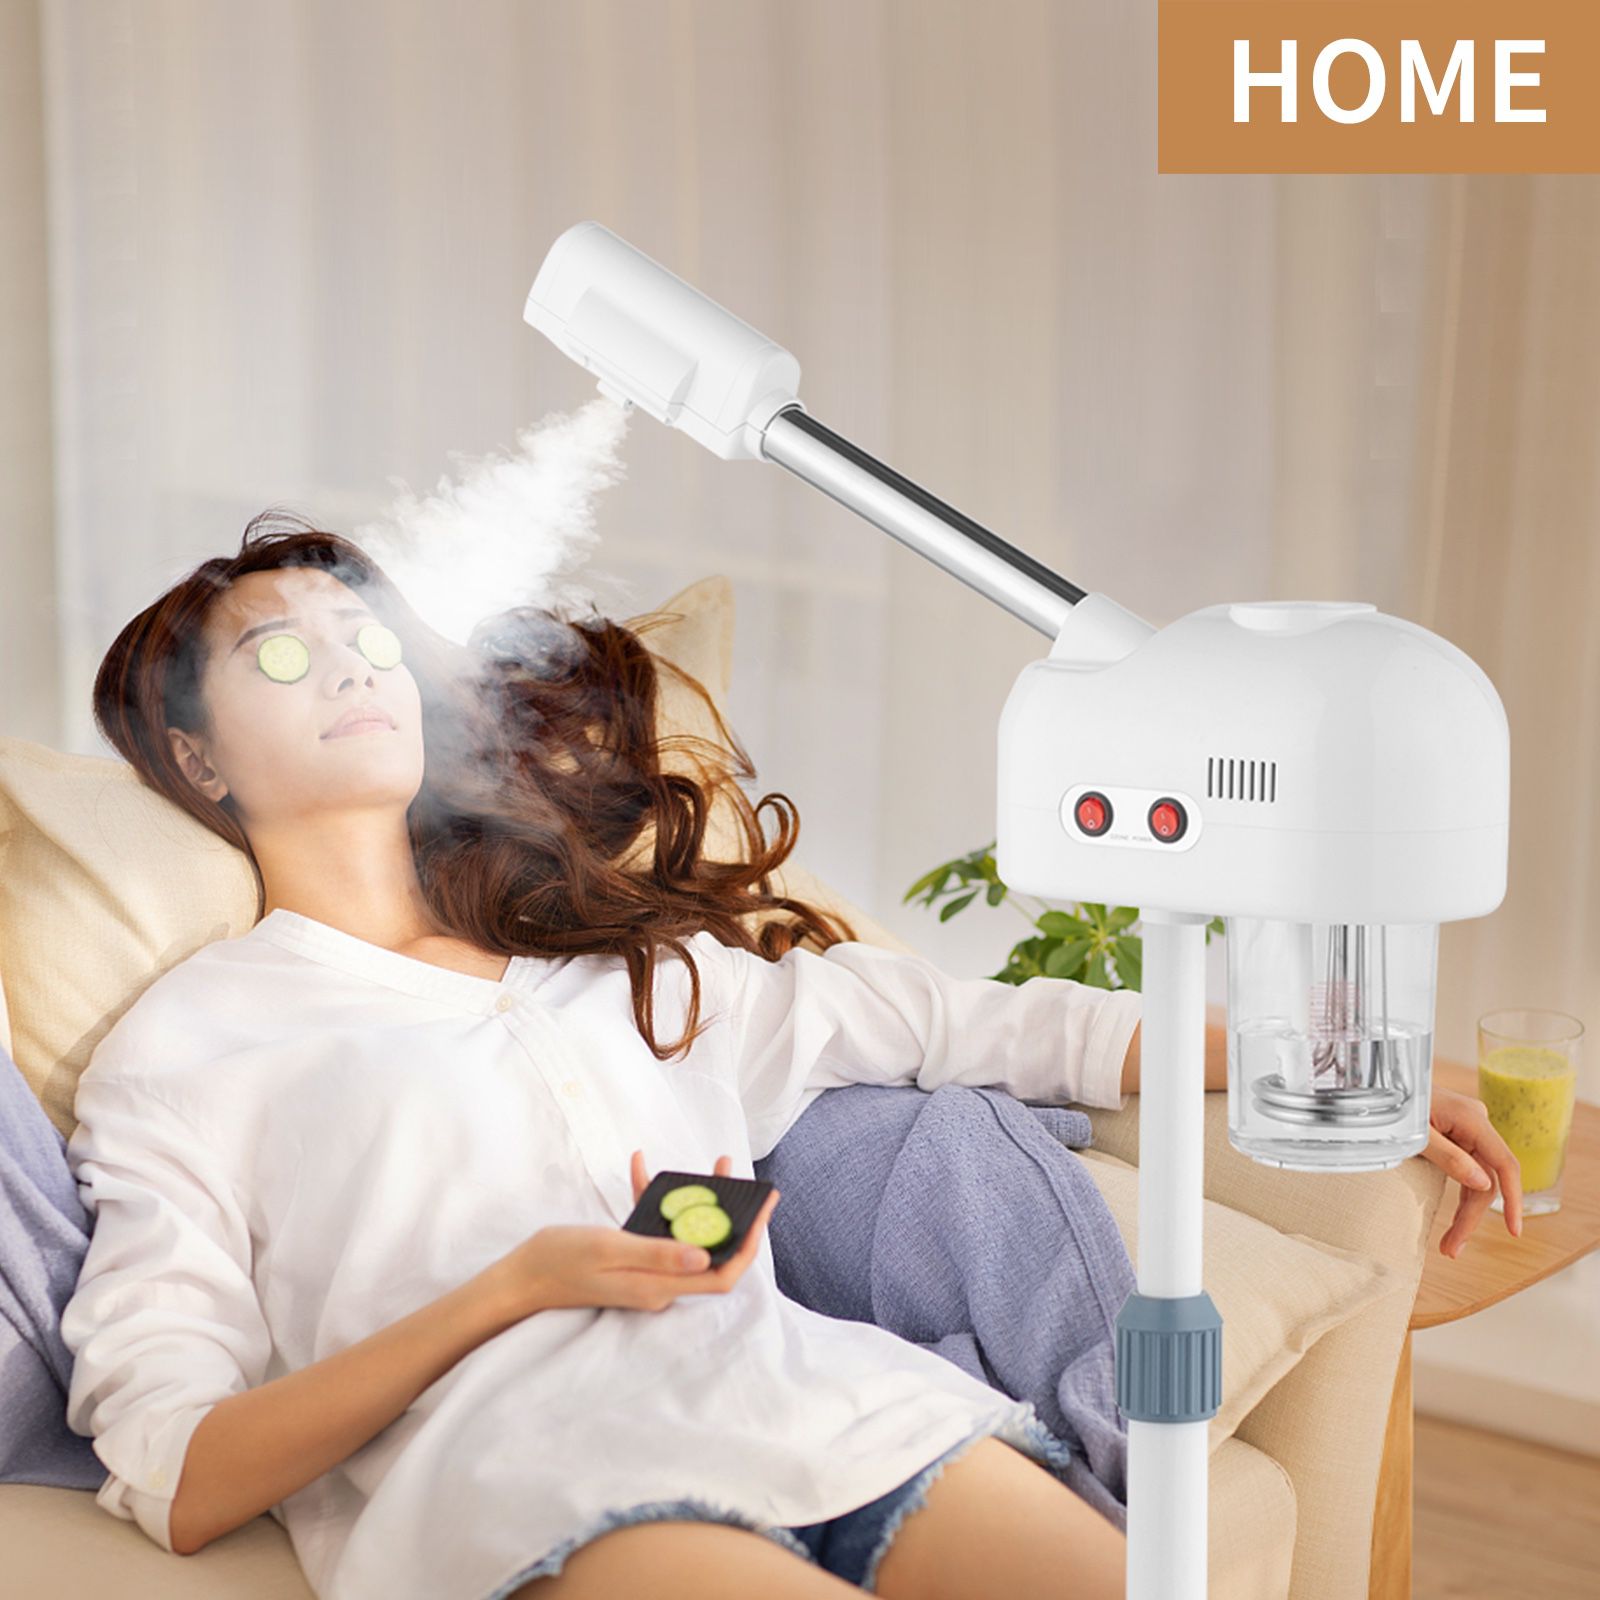 Pro 2 in 1 Facial Steamer 5X Magnifying Lamp Hot Ozone Machine Spa Salon Beauty